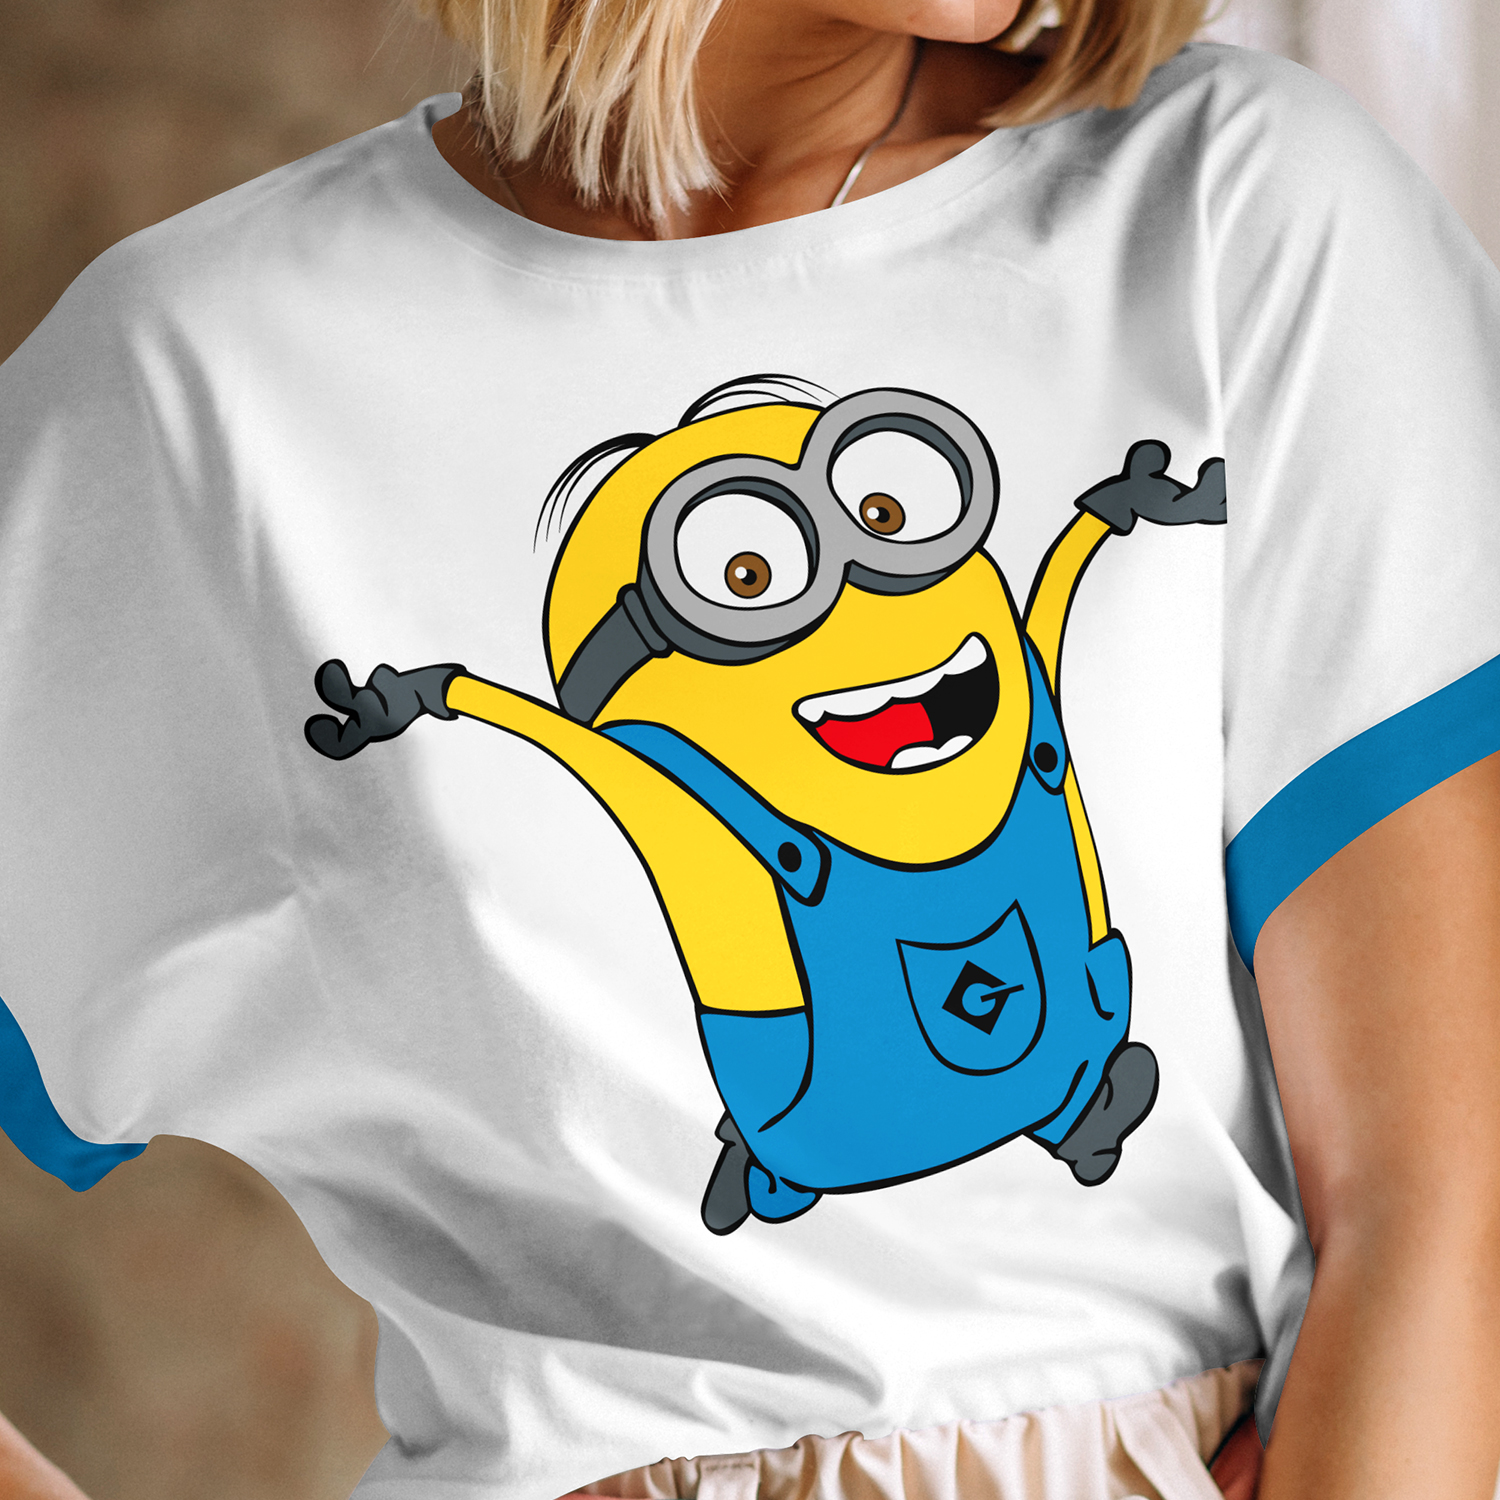 Cool prints with minions.